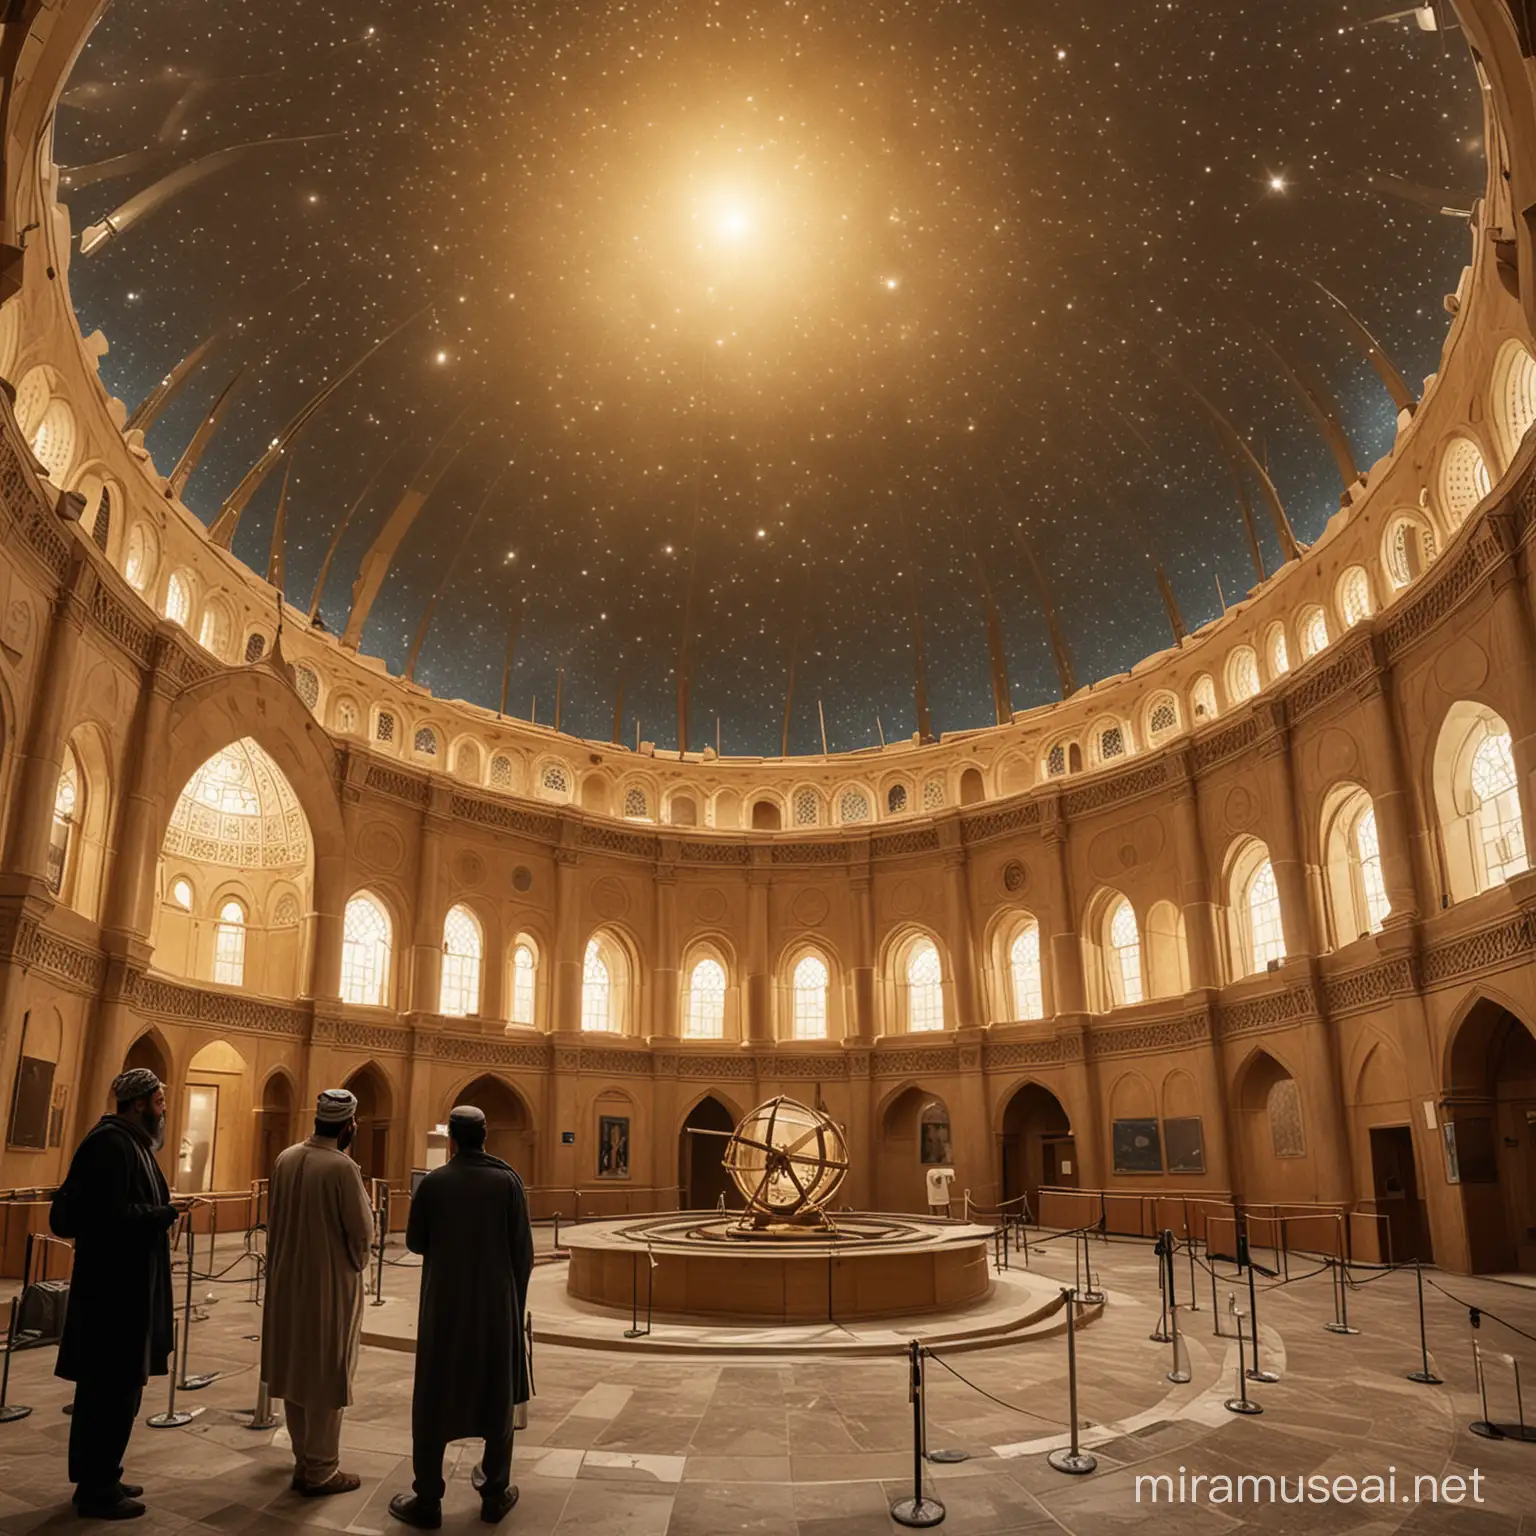  Design an interior museum exhibition of the abbasid era by installing a celestial observatory with a domed roof, equipped with telescopes and interactive displays showcasing advances in Islamic astronomy and navigation.
Illustration: Visitors can peer through telescopes to observe the stars and planets, learning about the contributions of Abbasid astronomers such as Al-Khwarizmi and Al-Biruni. Multimedia presentations offer virtual tours of famous observatories from the Golden Age